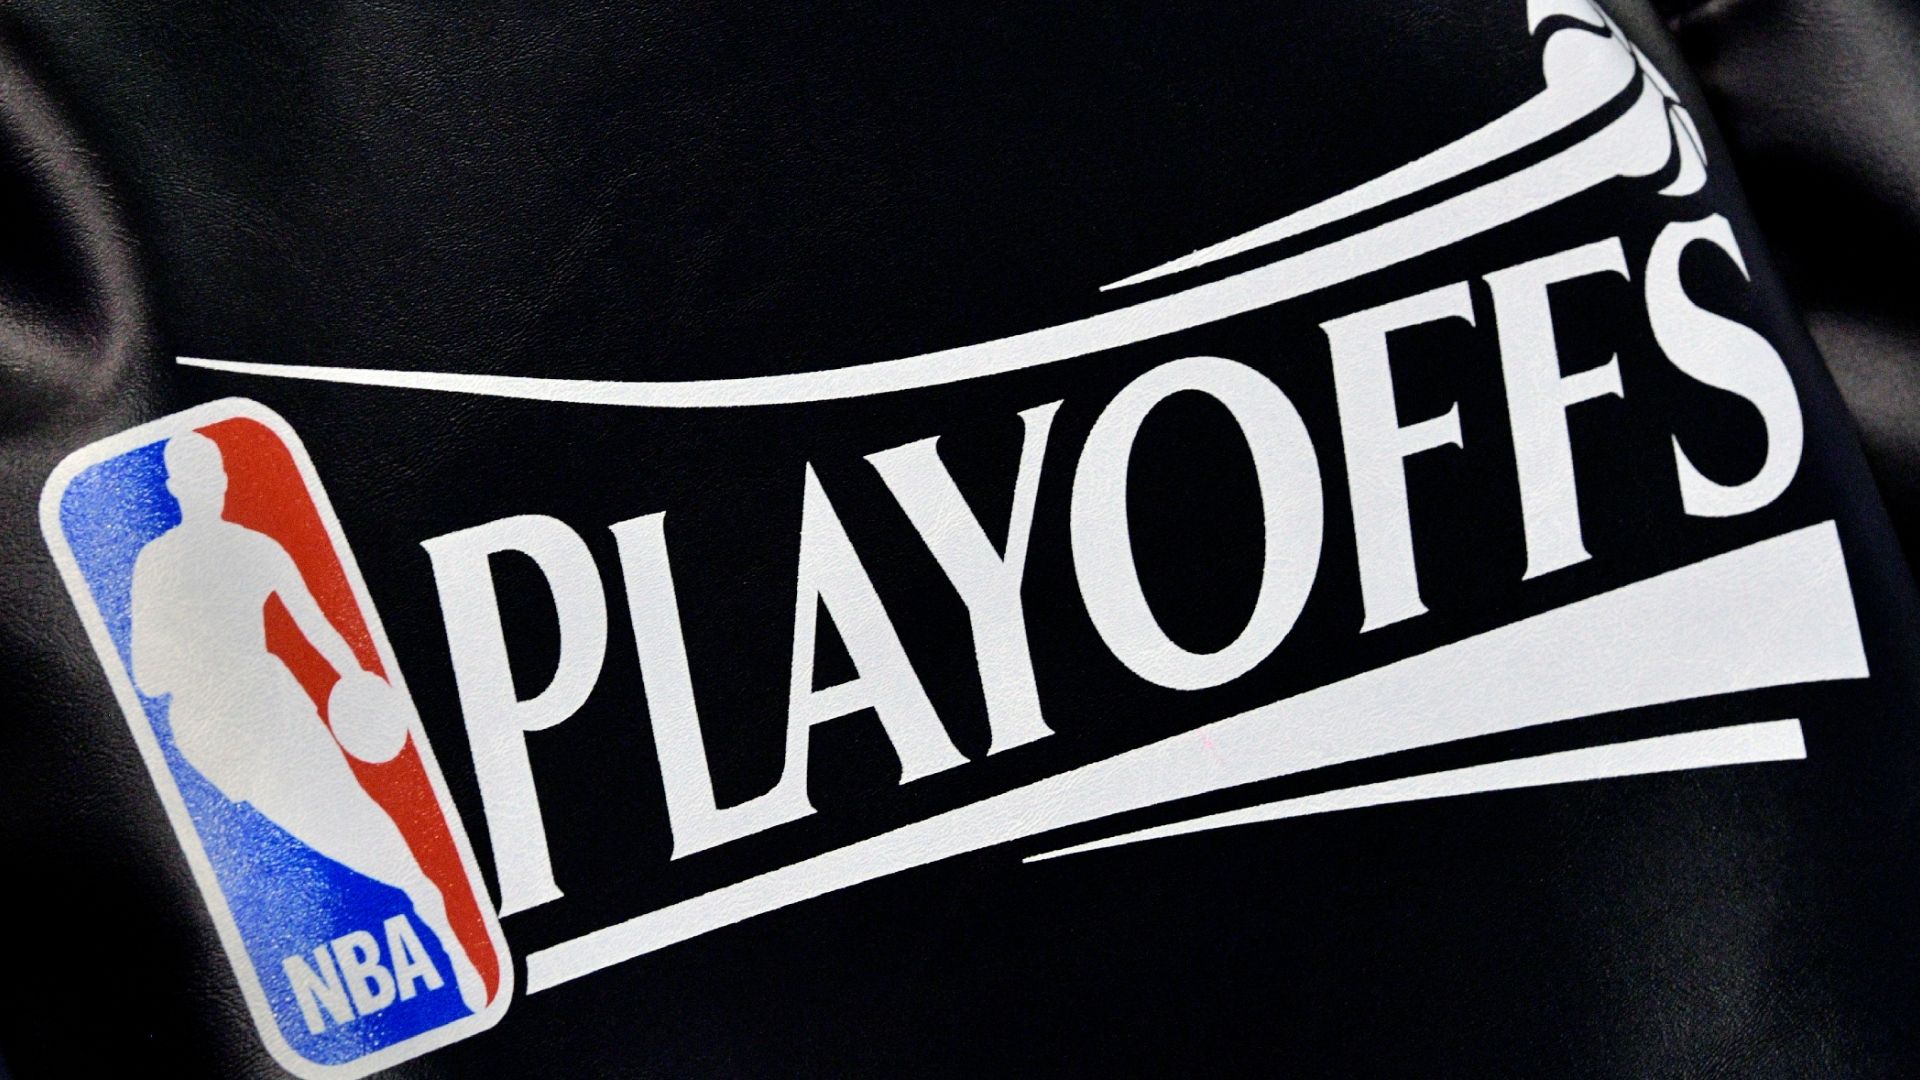 NBA Playoffs 2021: Complete first round schedule. NBA.com India. The official site of